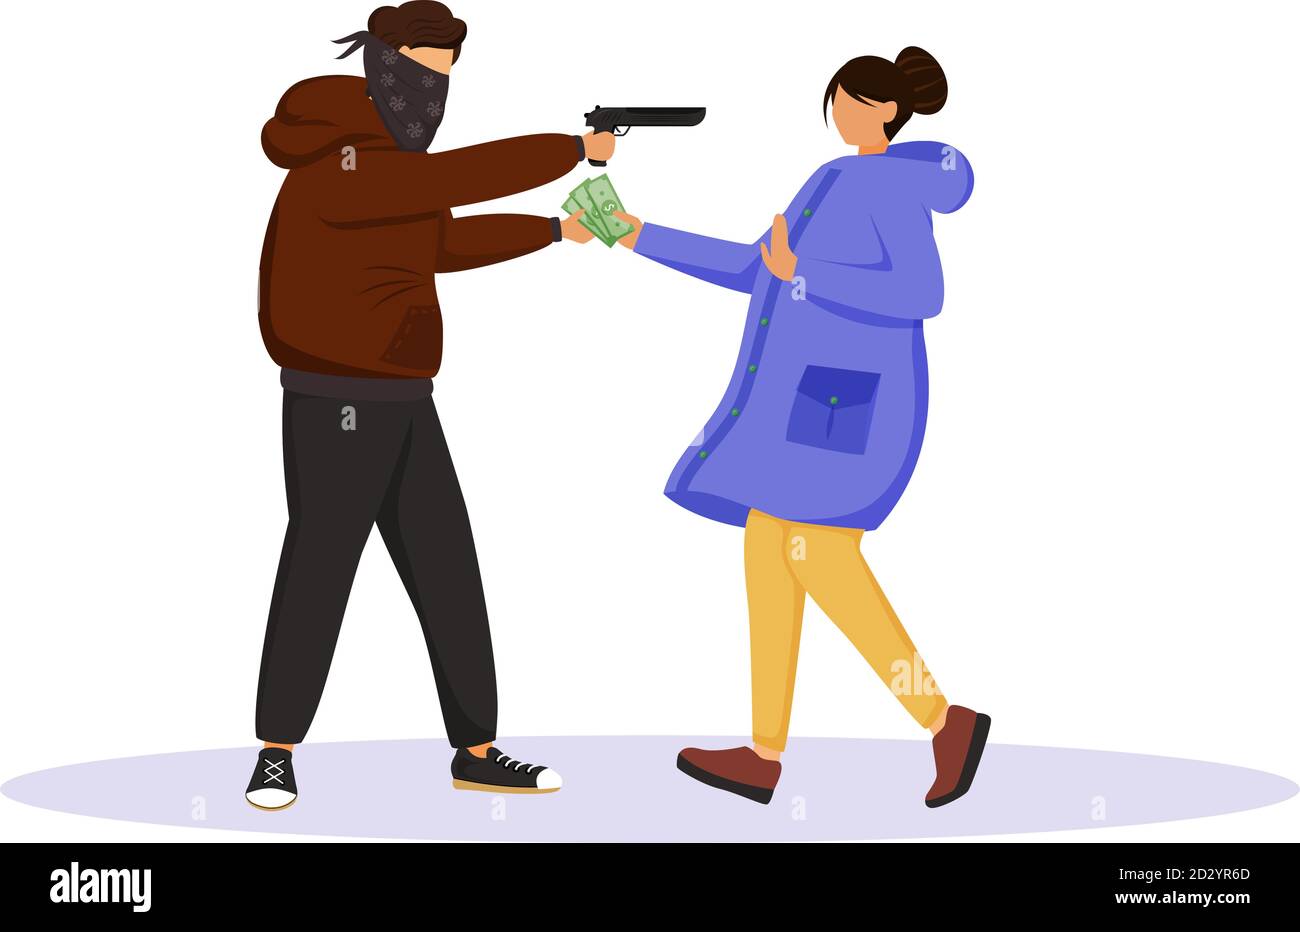 Armed street robbery flat color vector faceless character. Burglar threatening woman with gun. Thief stealing cash from person. Masked criminal Stock Vector